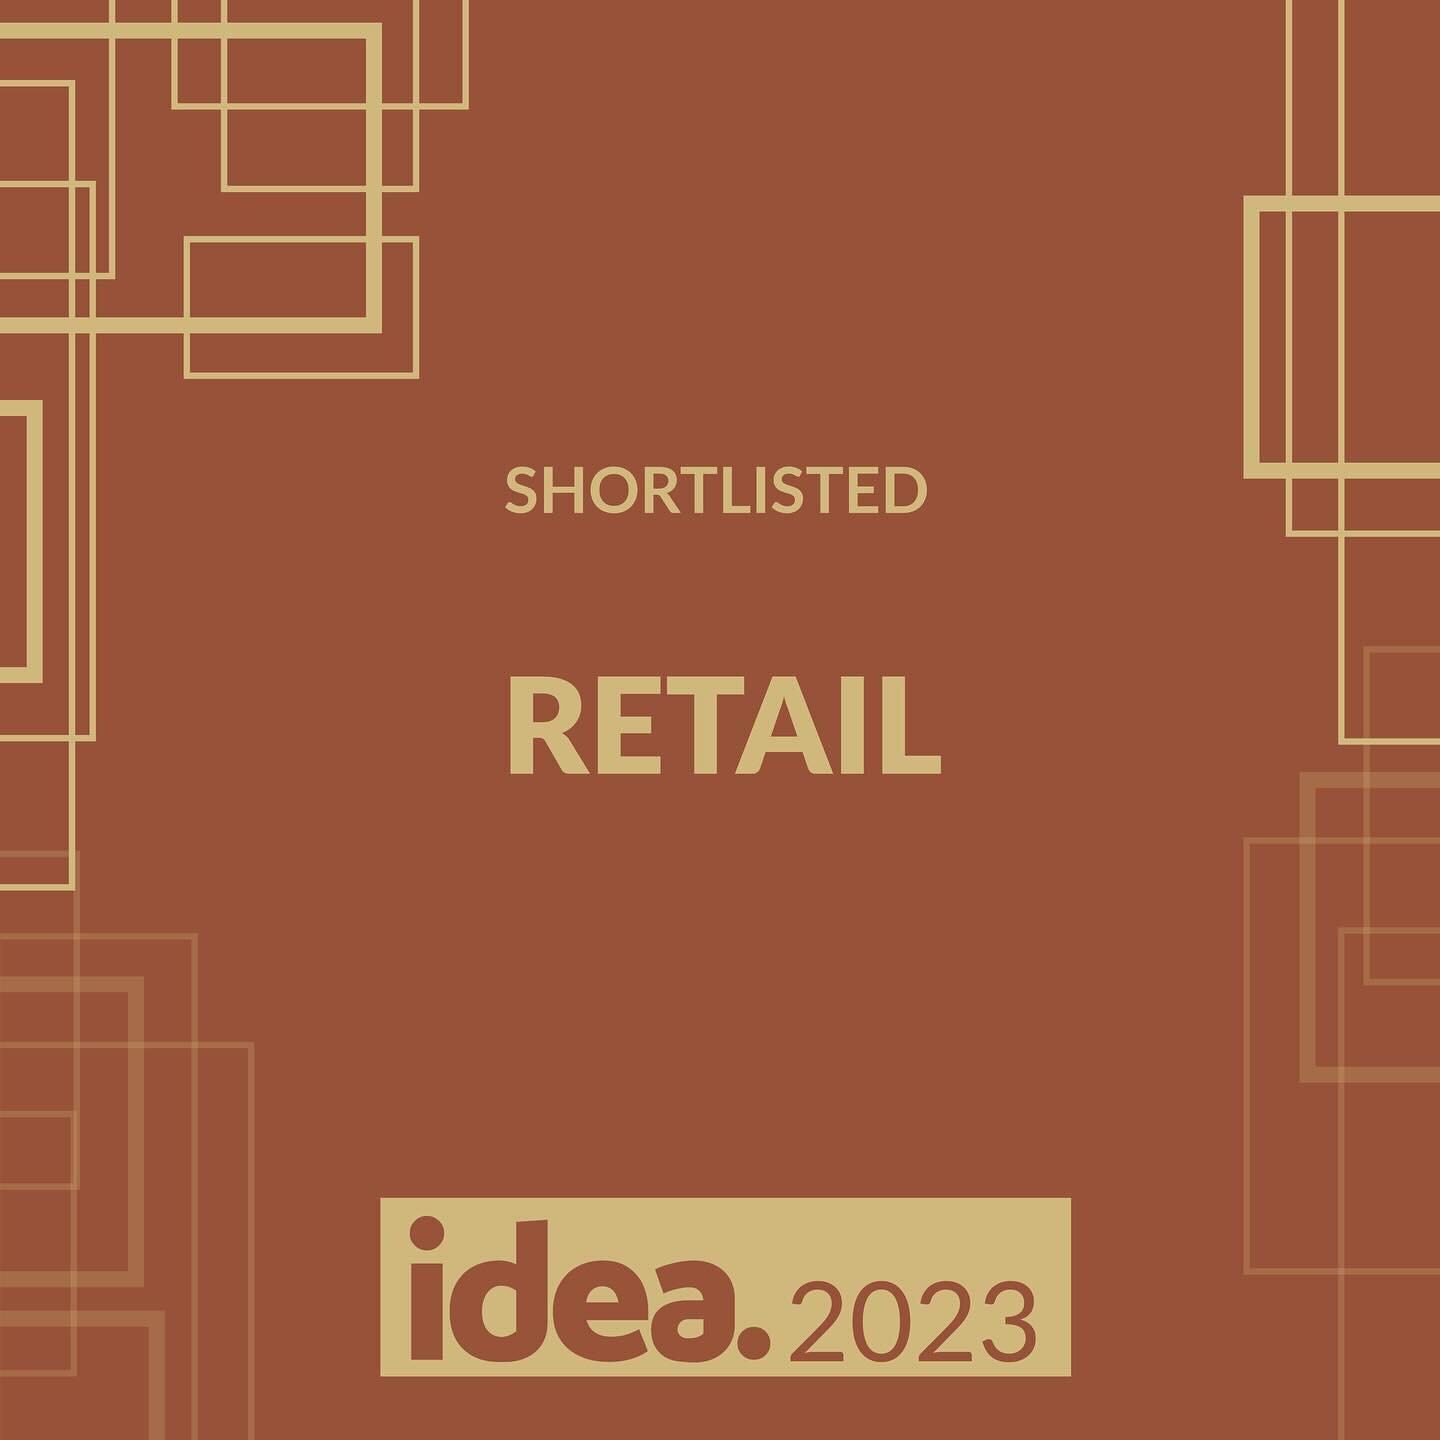 SHORTLISTED - Retail Award 
Interior Design Excellence Awards (IDEA) Australia

Thanks to a wonderful Client @gsdiamonds who with bravery and business savvy are evolving their retail brand into the future. 
Great as always to work with @showcaseanddi